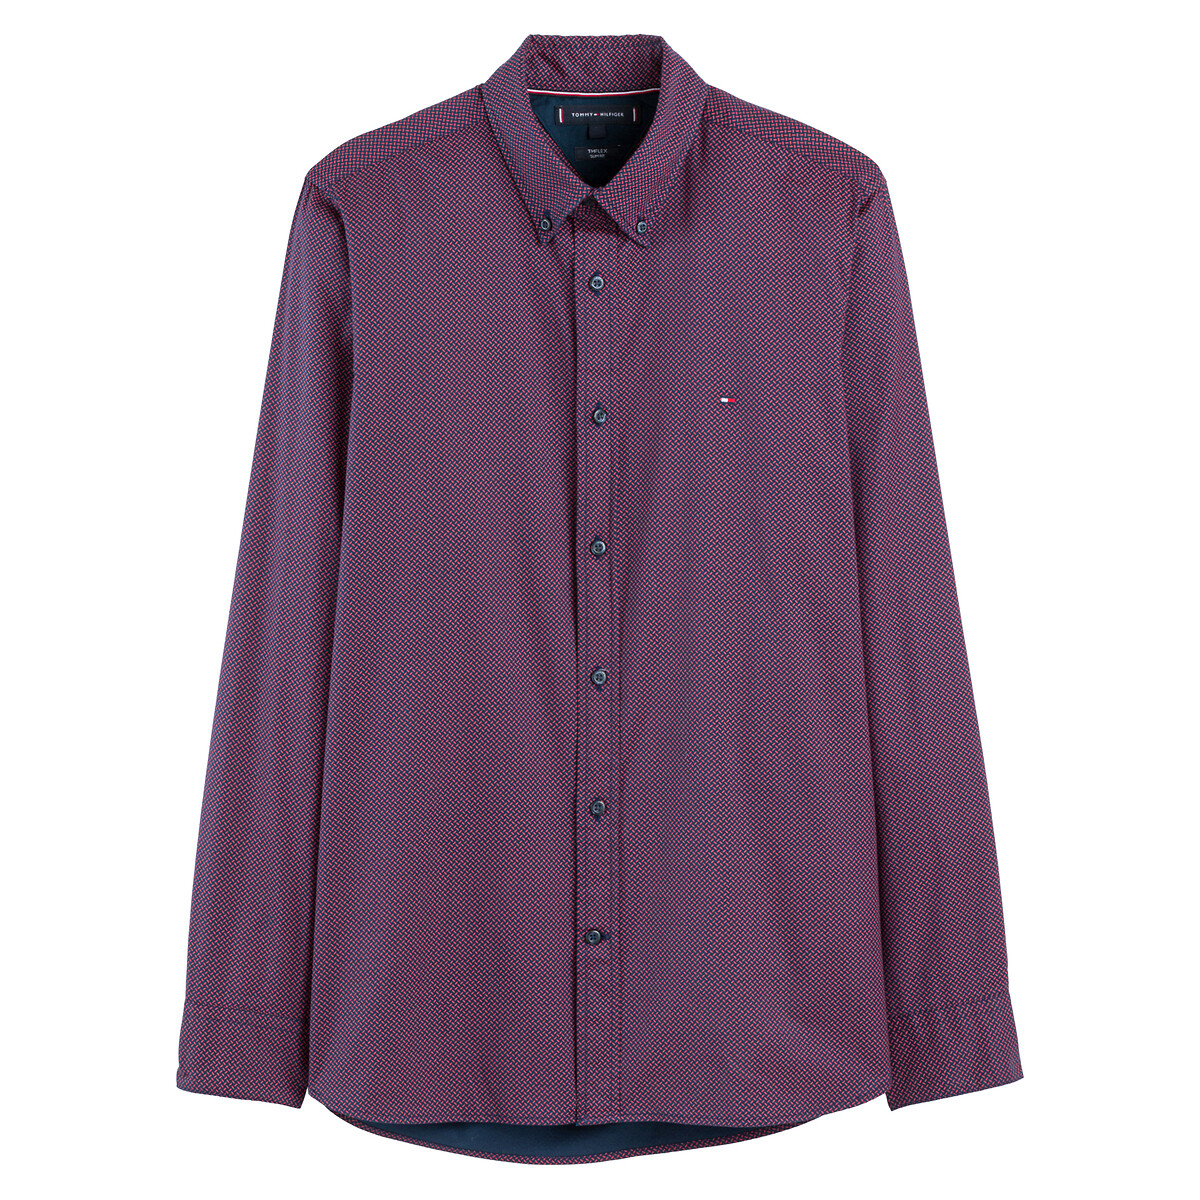 Embroidered Logo Cotton Shirt with Buttoned Collar